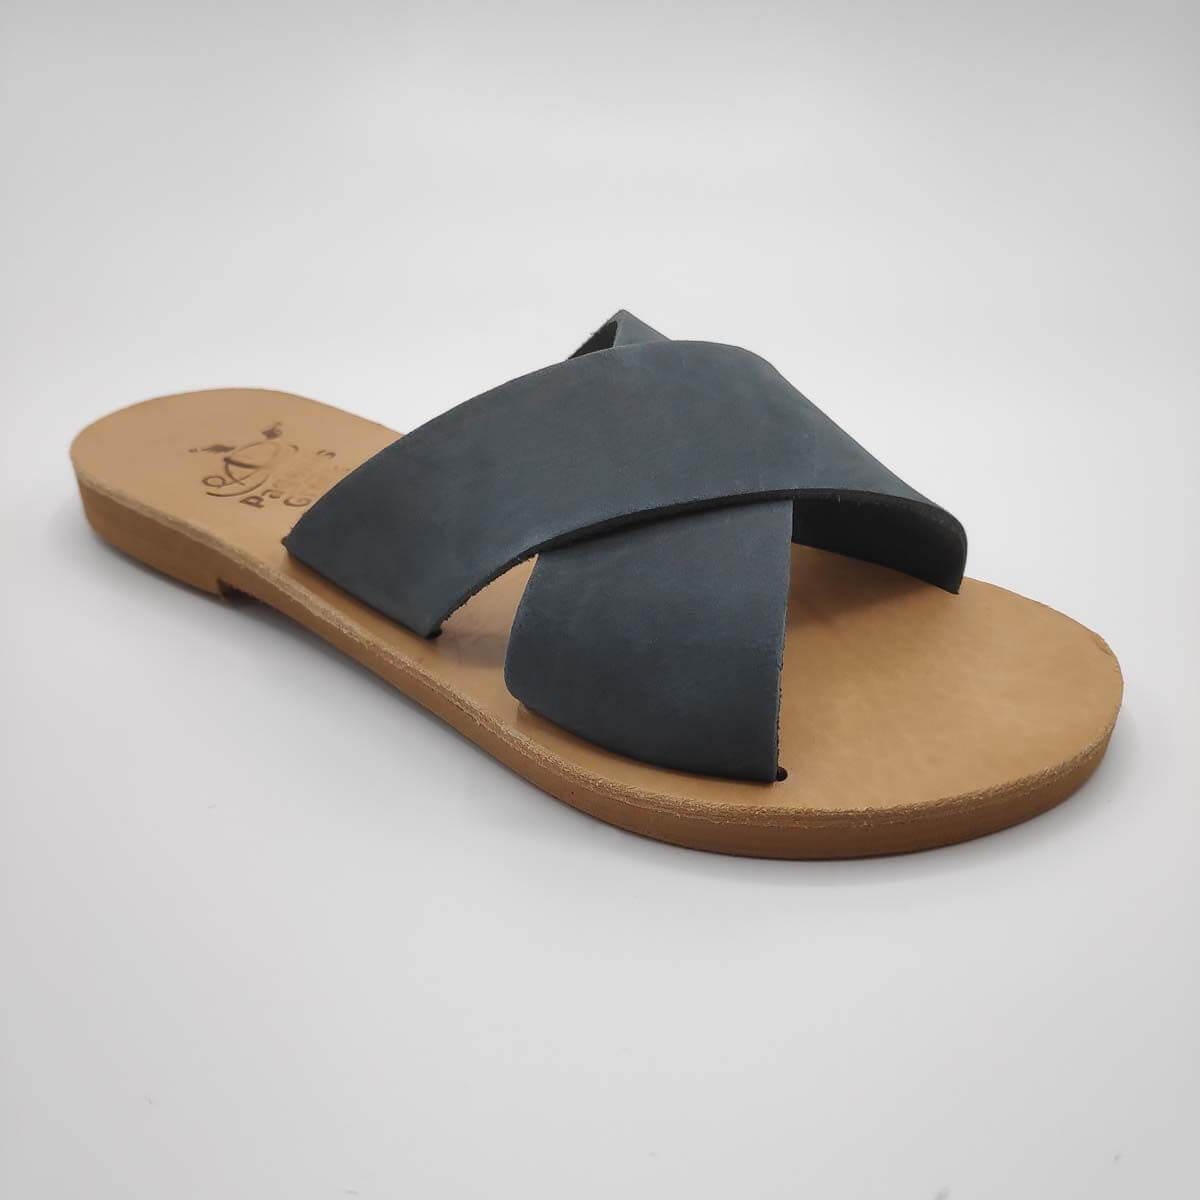 Xi Leather Cross Strap Sandals | Made in Greece | Pagonis Greek Sandals